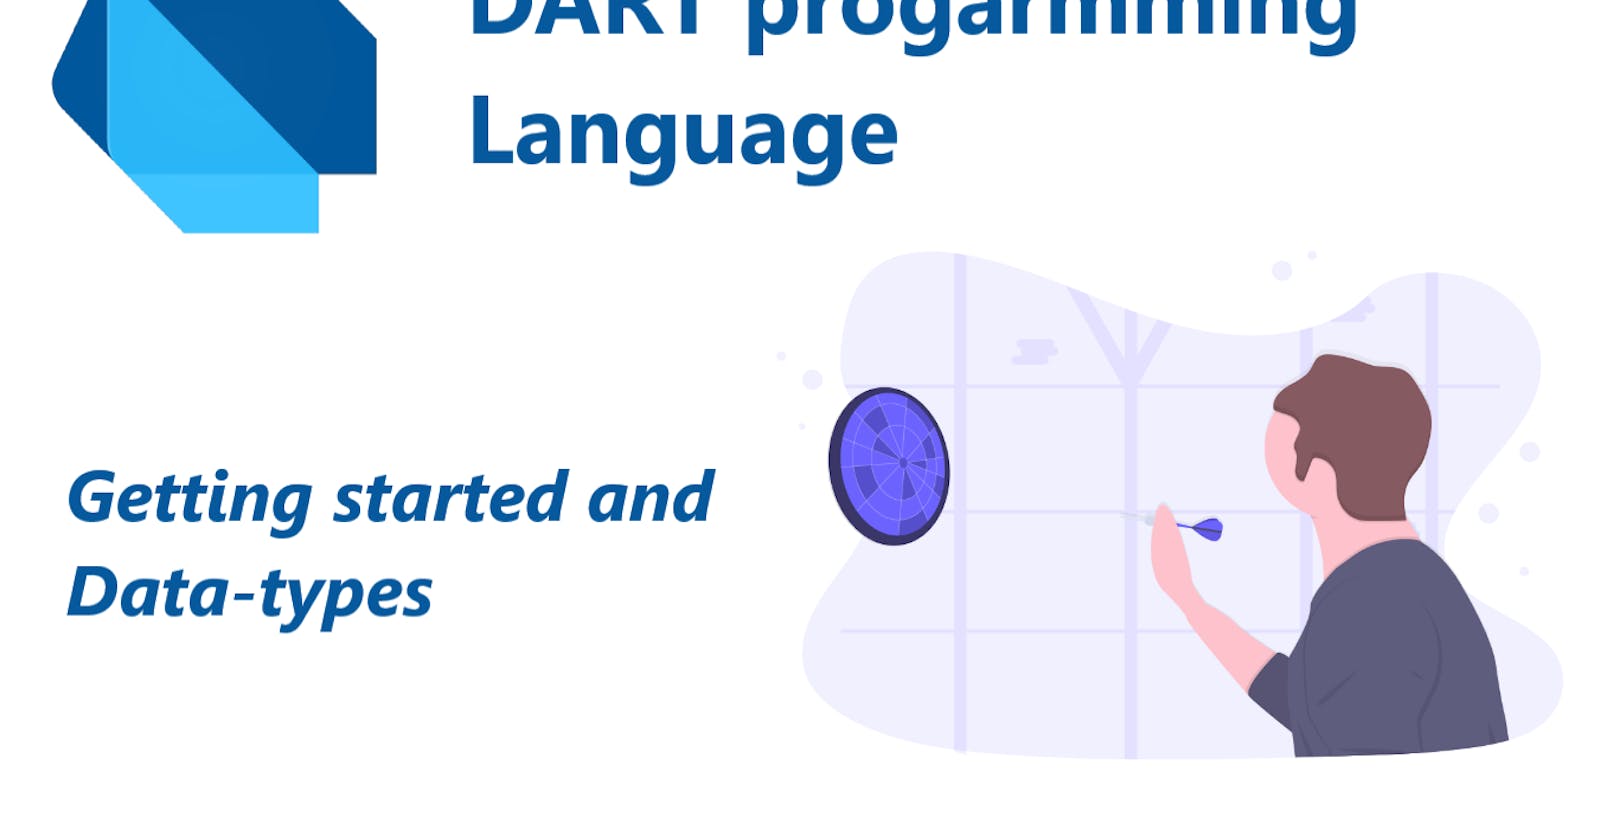 Dart tutorial for beginners (Part-1) | Getting started, Data-types